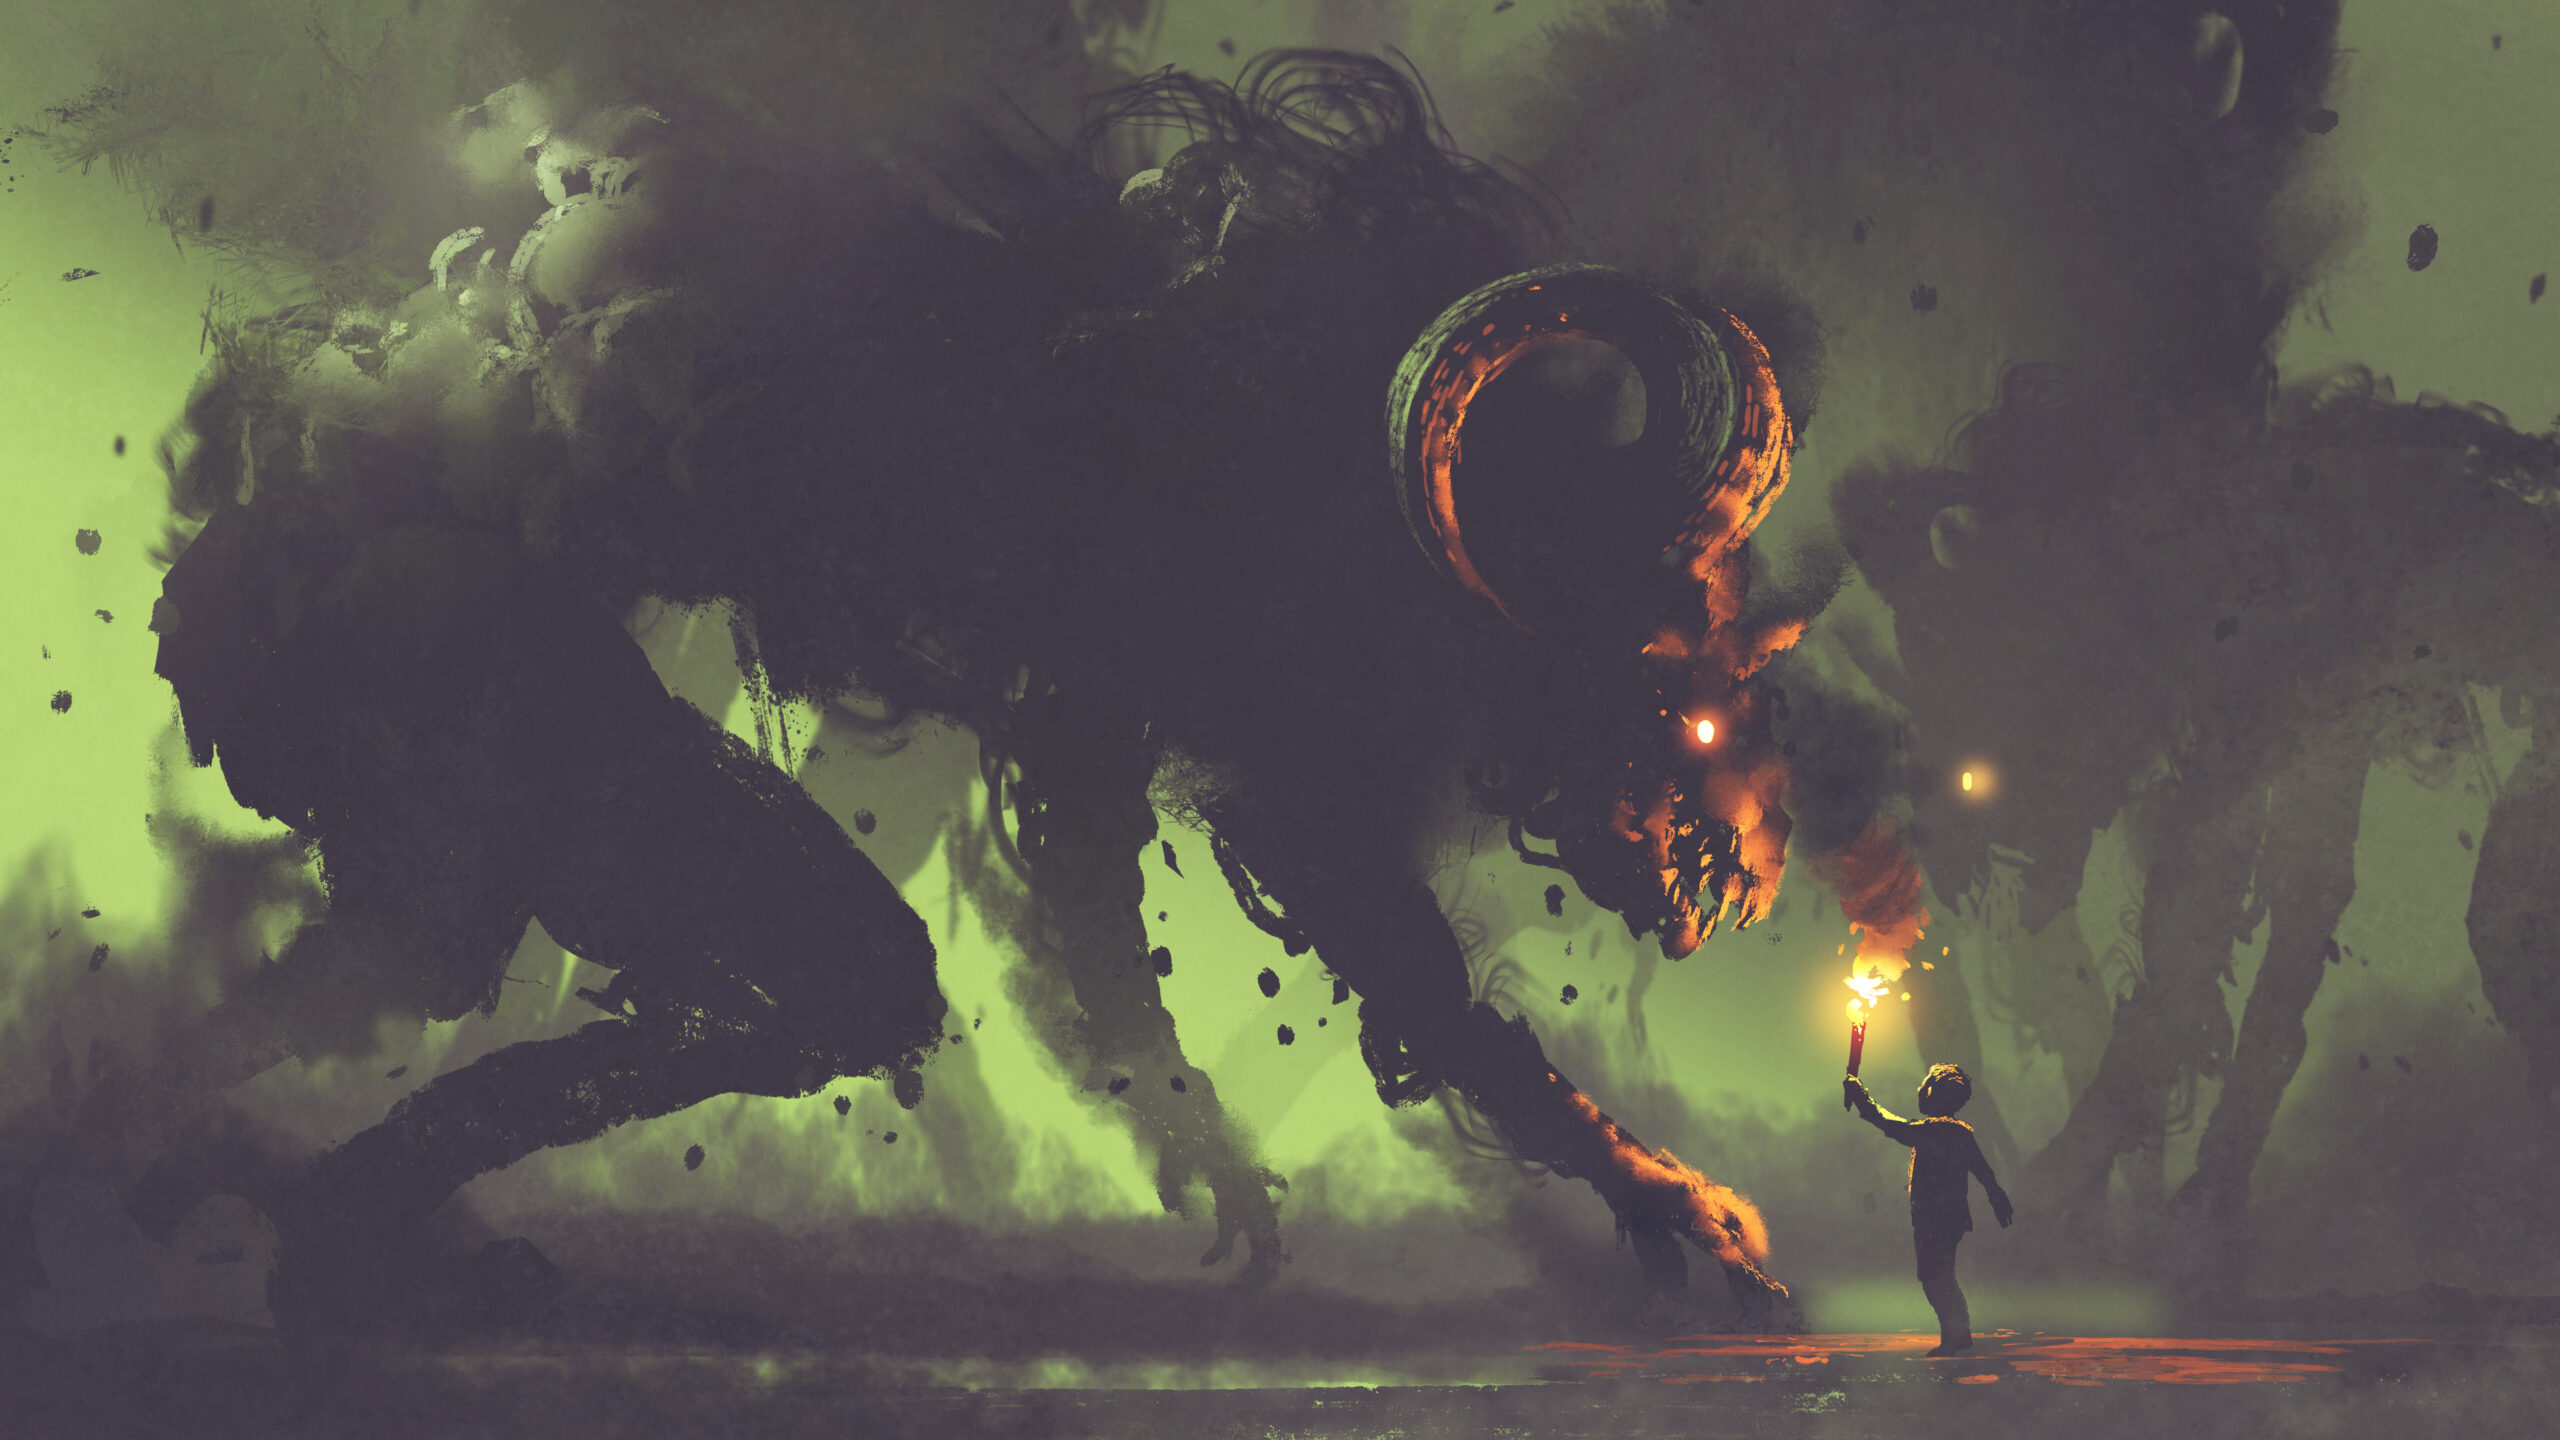 dark-fantasy-concept-showing-boy-with-torch-facing-smoke-monsters-with-demon-s-horns-digital-art-style-illustration-painting